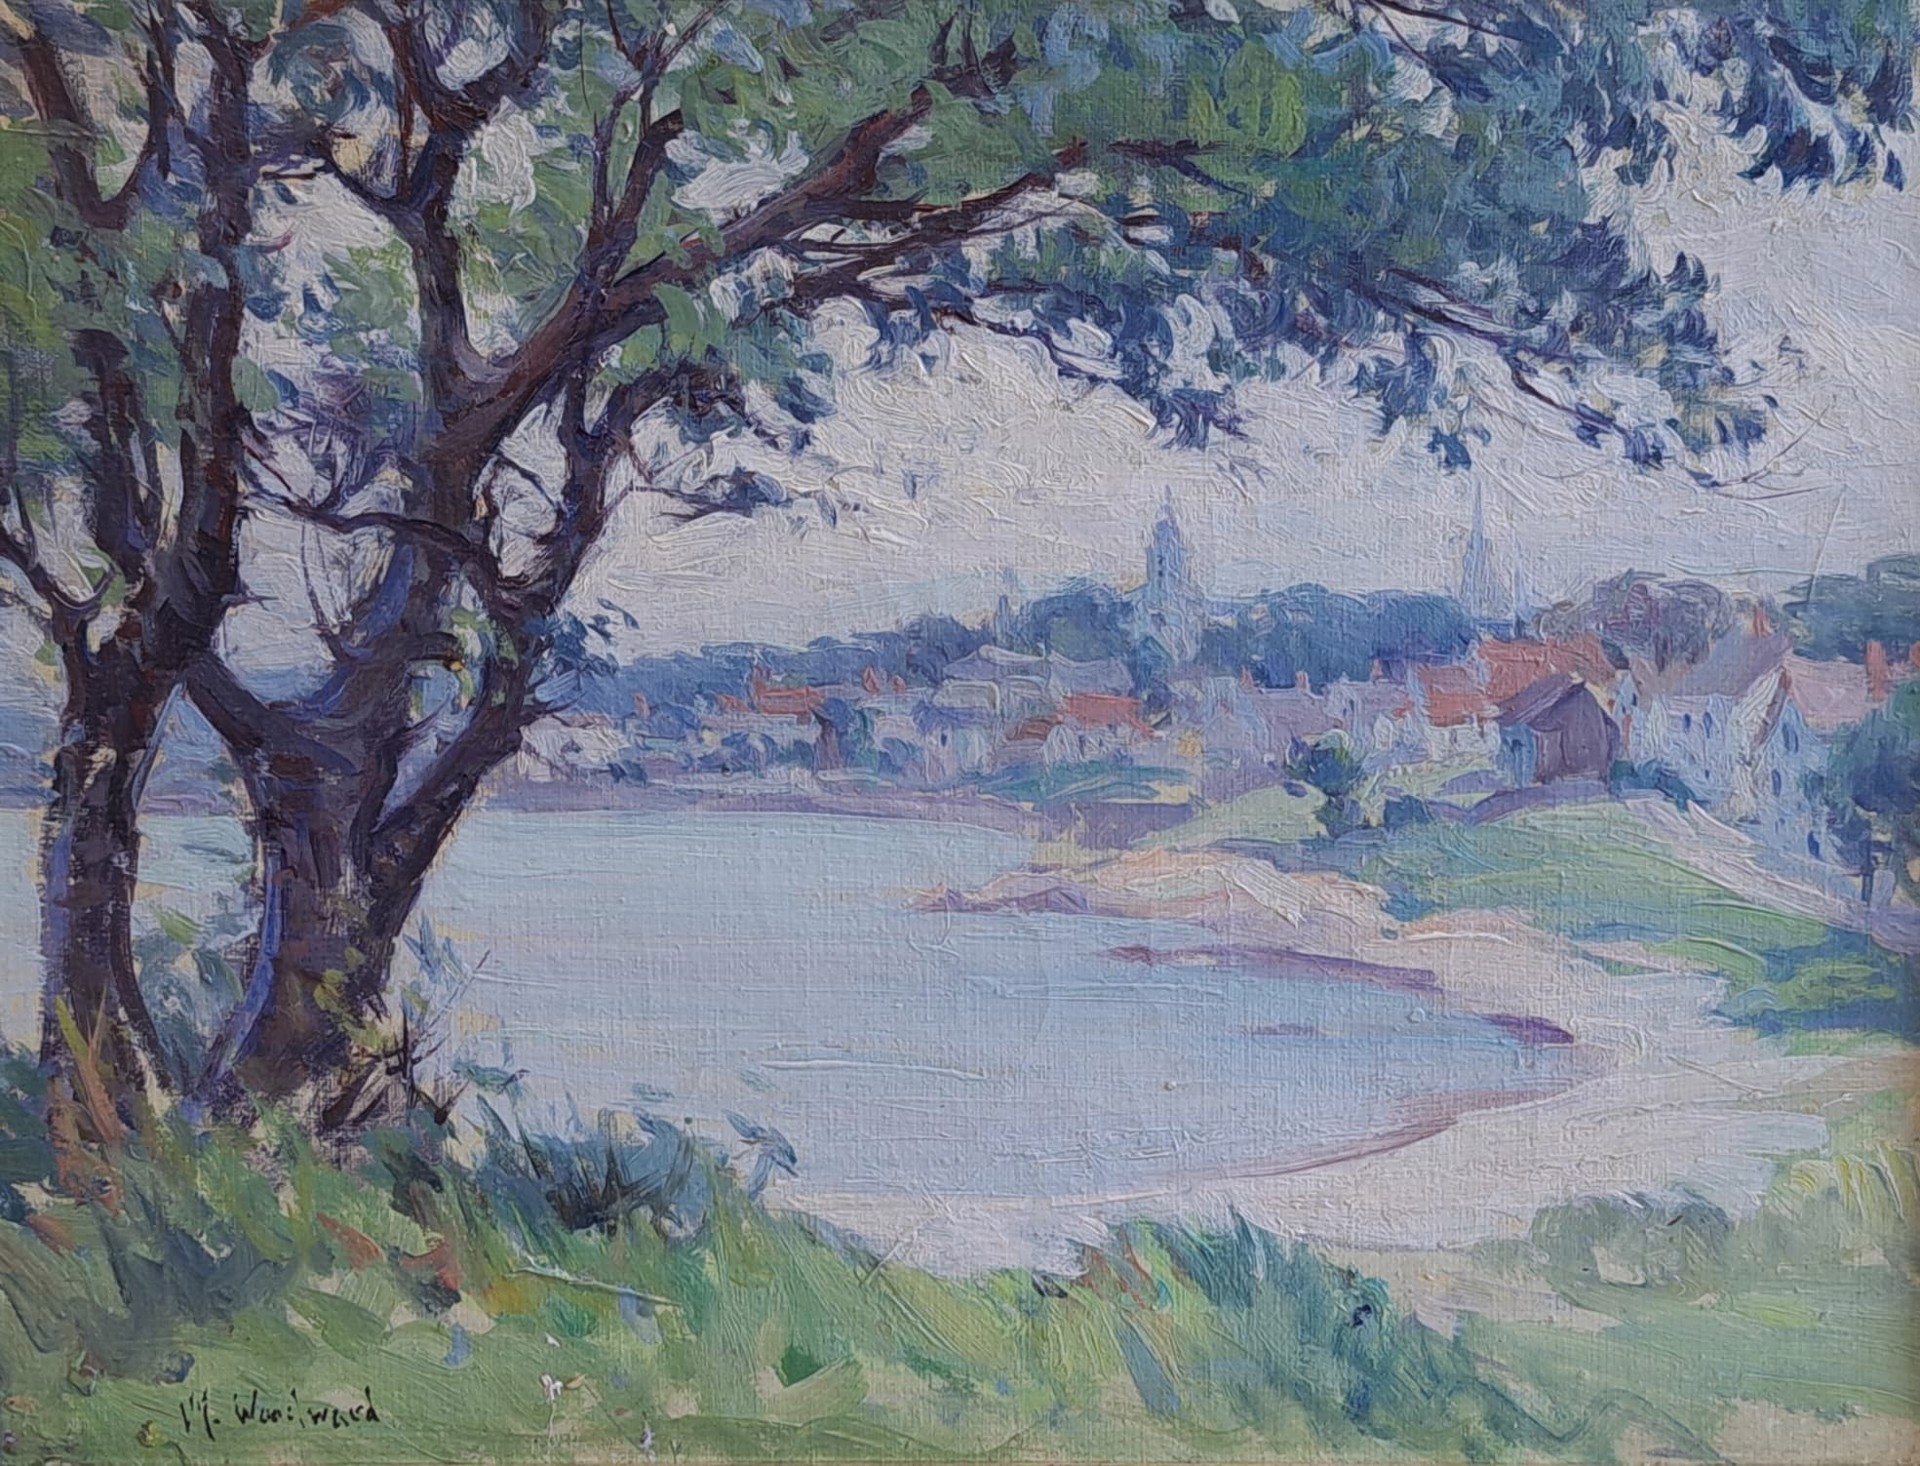 Back Beach, Rockport by Mabel May Woodward (1877-1945)